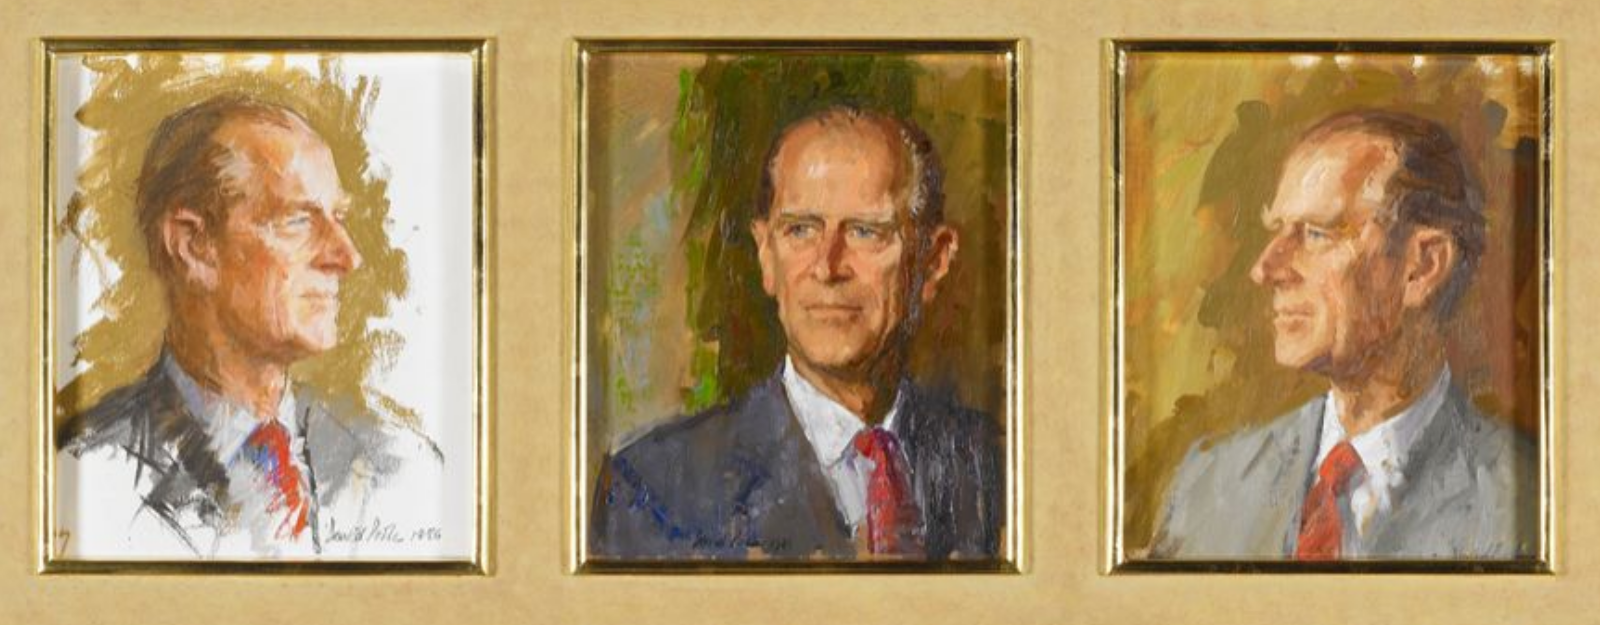 Painting of Prince Philip